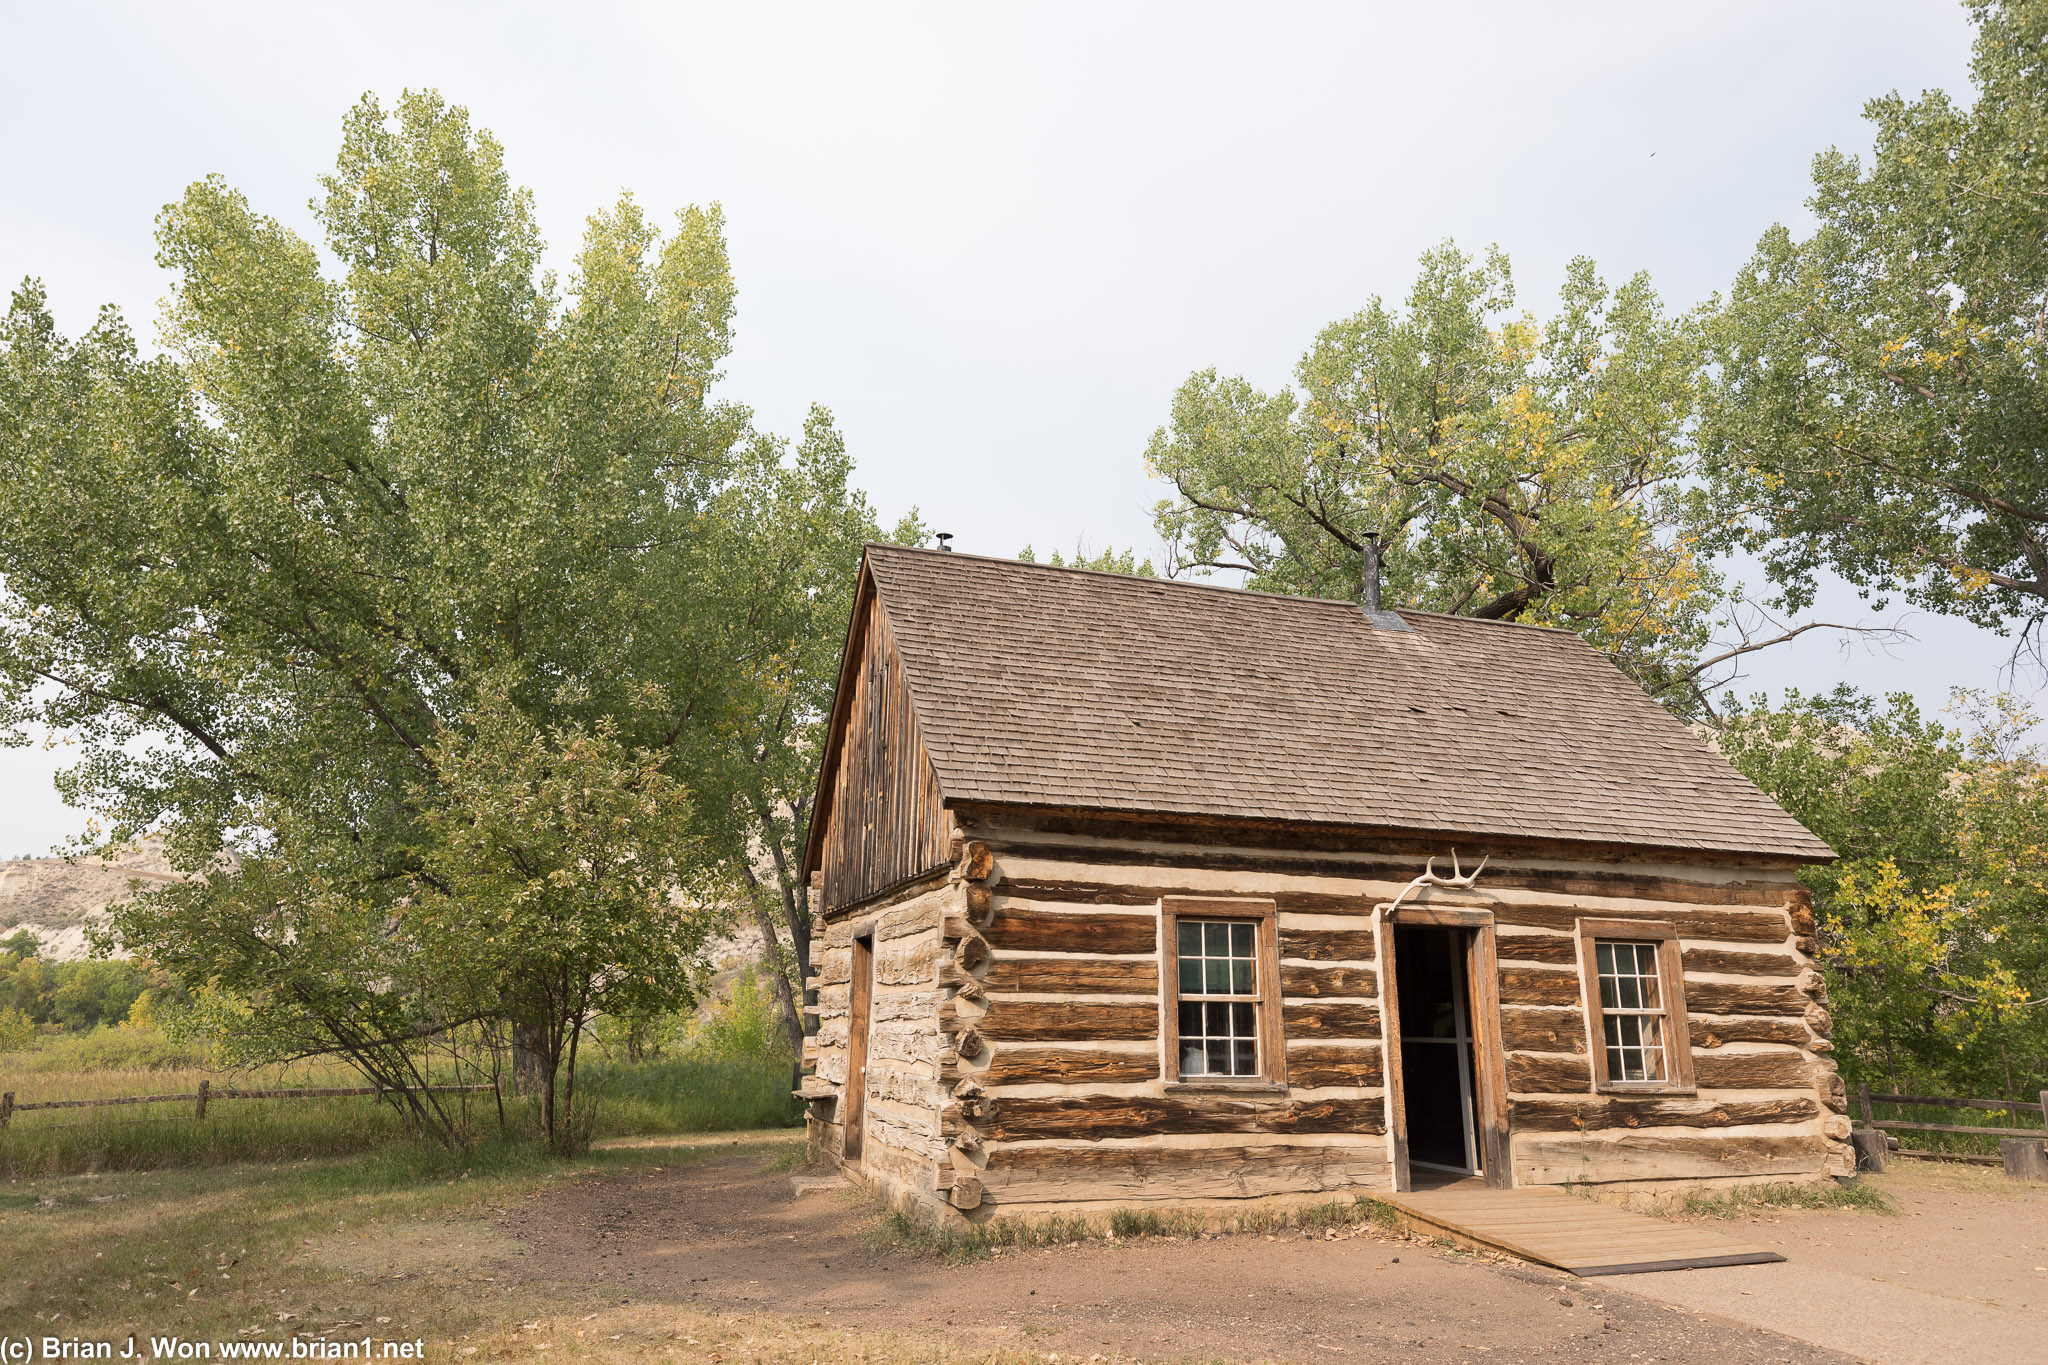 Maltese Cross Cabin, Theodoore Roosevelt's first ranch cabin.